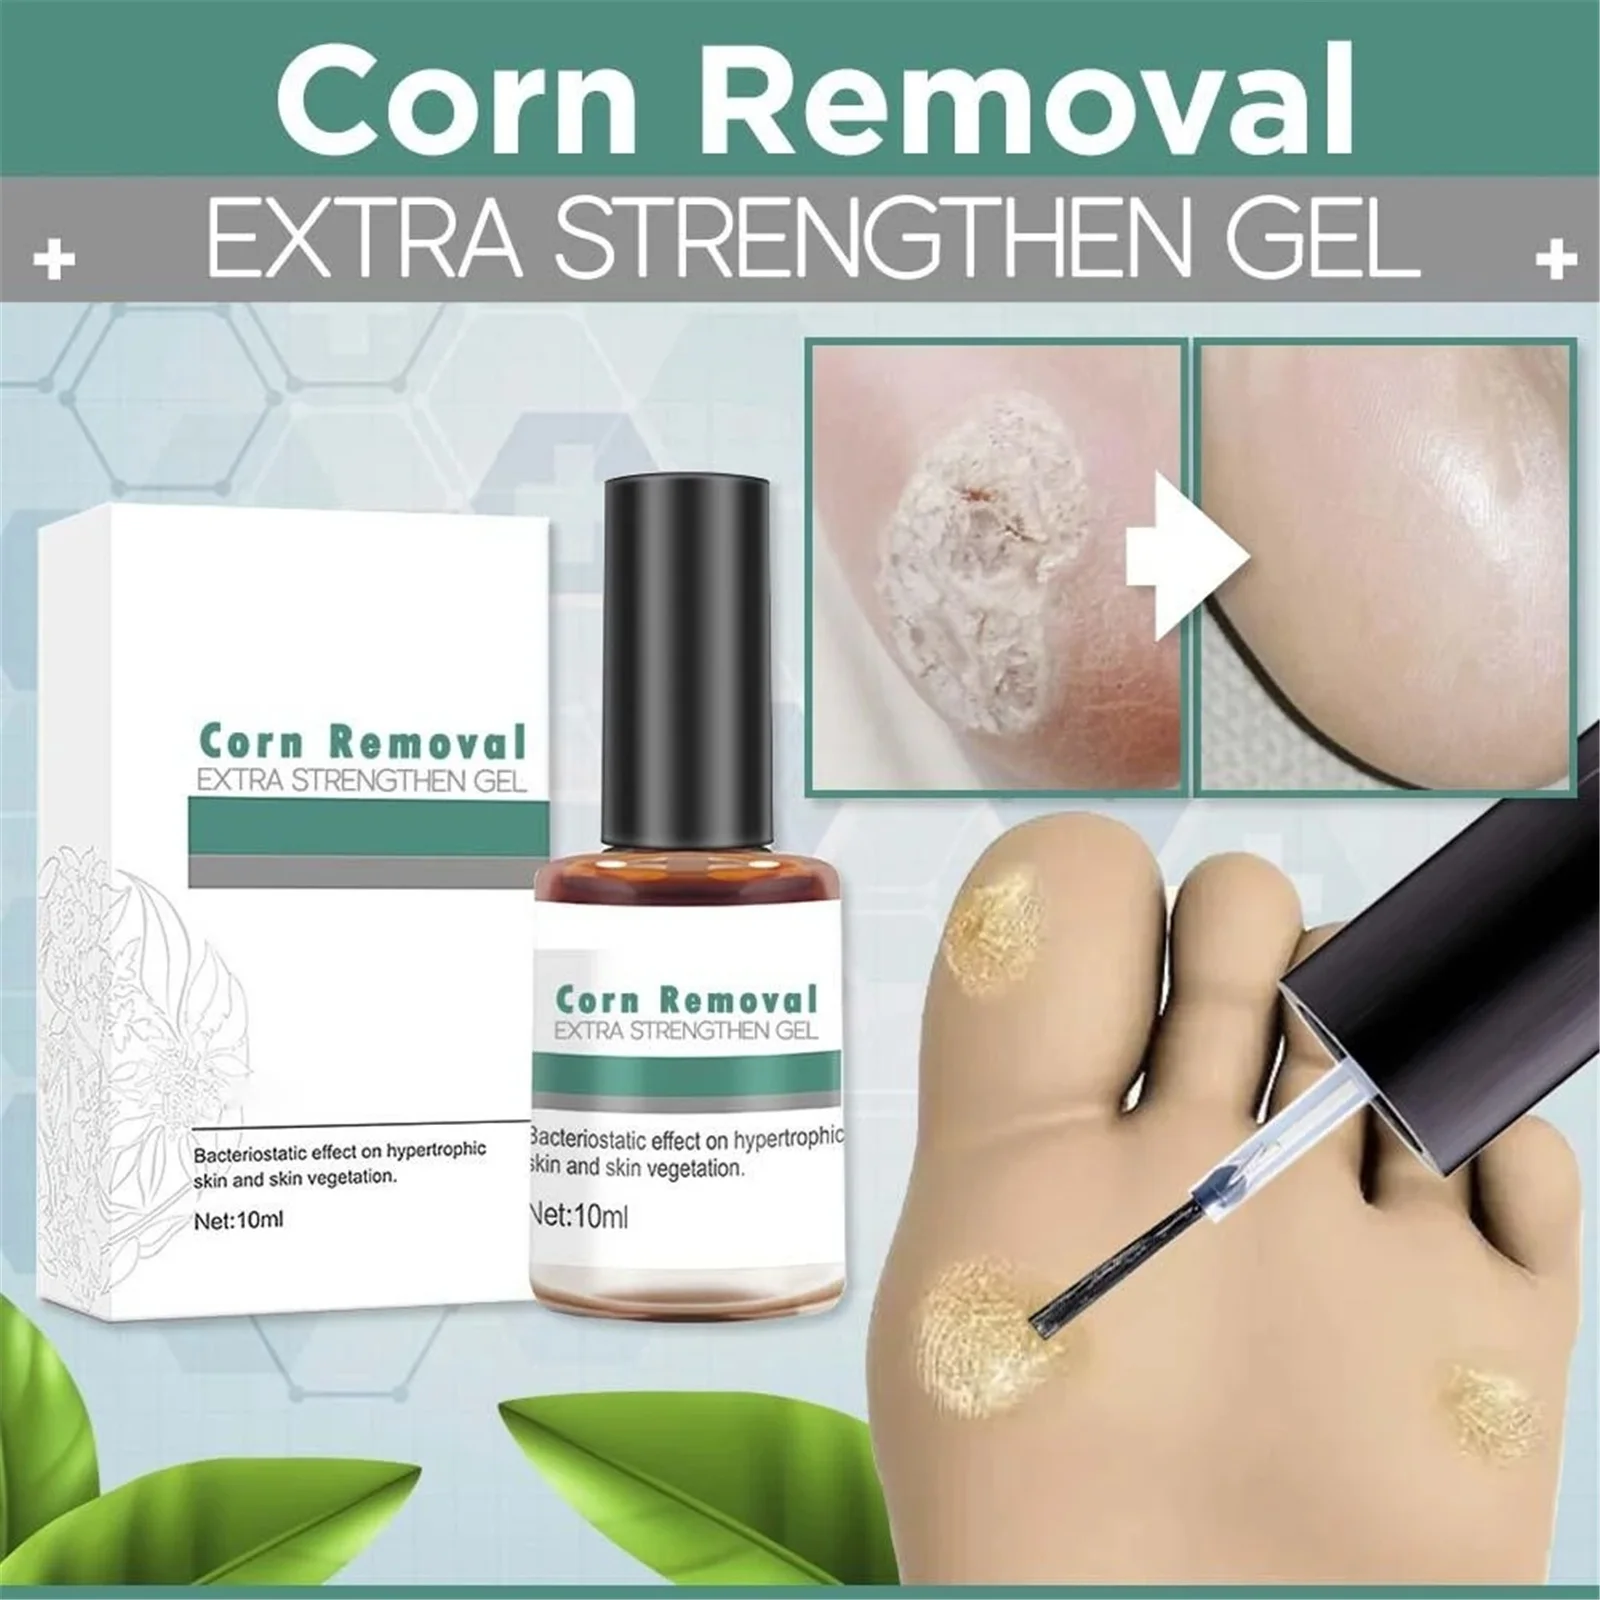 Hot Corn Removal Extra Strengthen Gel 10ml Body Warts Treatment Cream Foot  Care Cream Skin Tag Remover|Feet| - AliExpress